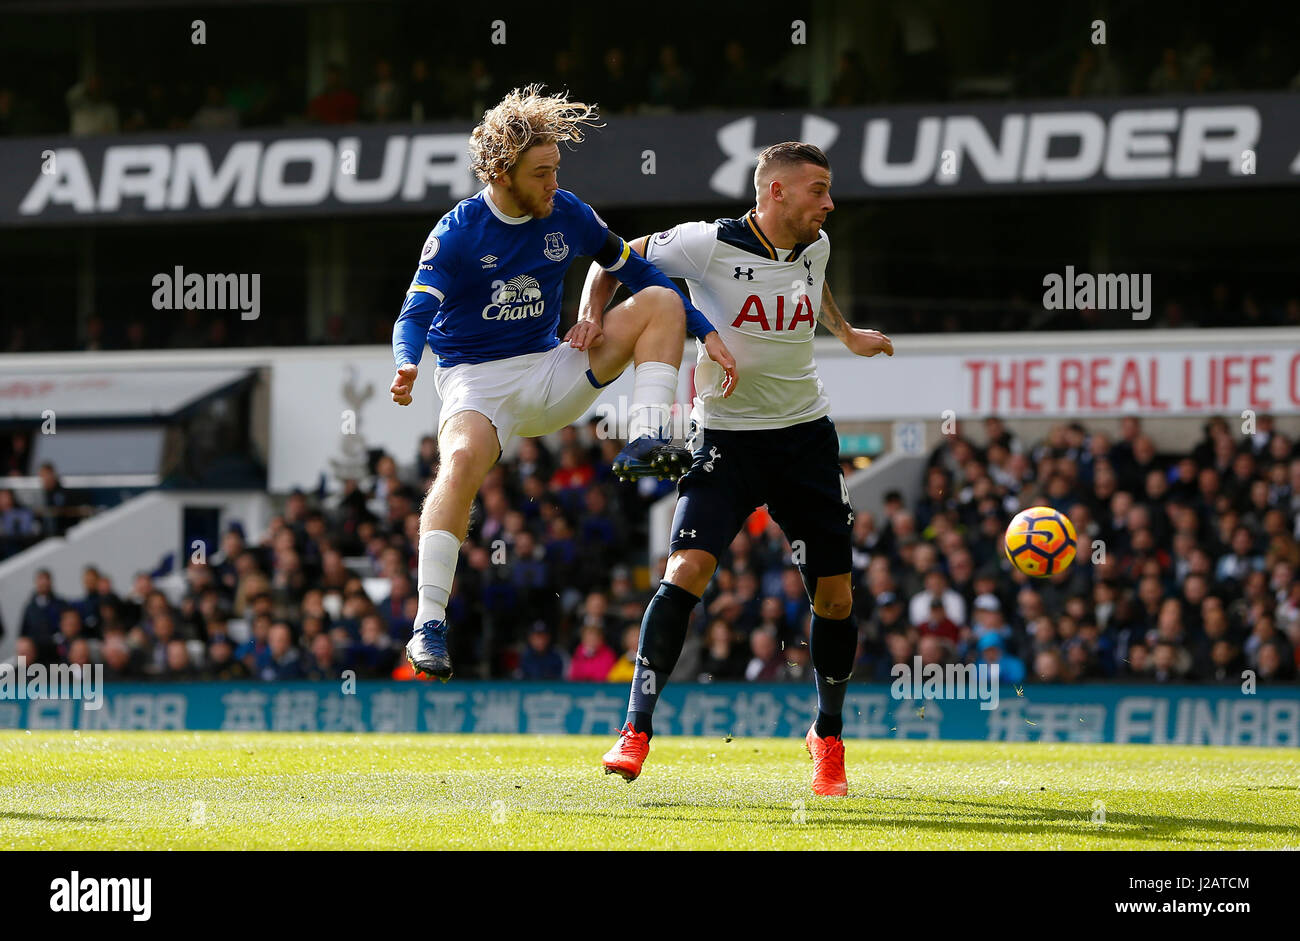 Tom Davies of Everton  vies for the ball with Toby Alderweireld of Tottenham during the Premier League match between Tottenham Hotspur and Everton at White Hart Lane in London. March 5, 2017. James Boardman / Telephoto Images EDITORIAL USE ONLY  FA Premier League and Football League images are subject to DataCo Licence see www.football-dataco.com Stock Photo